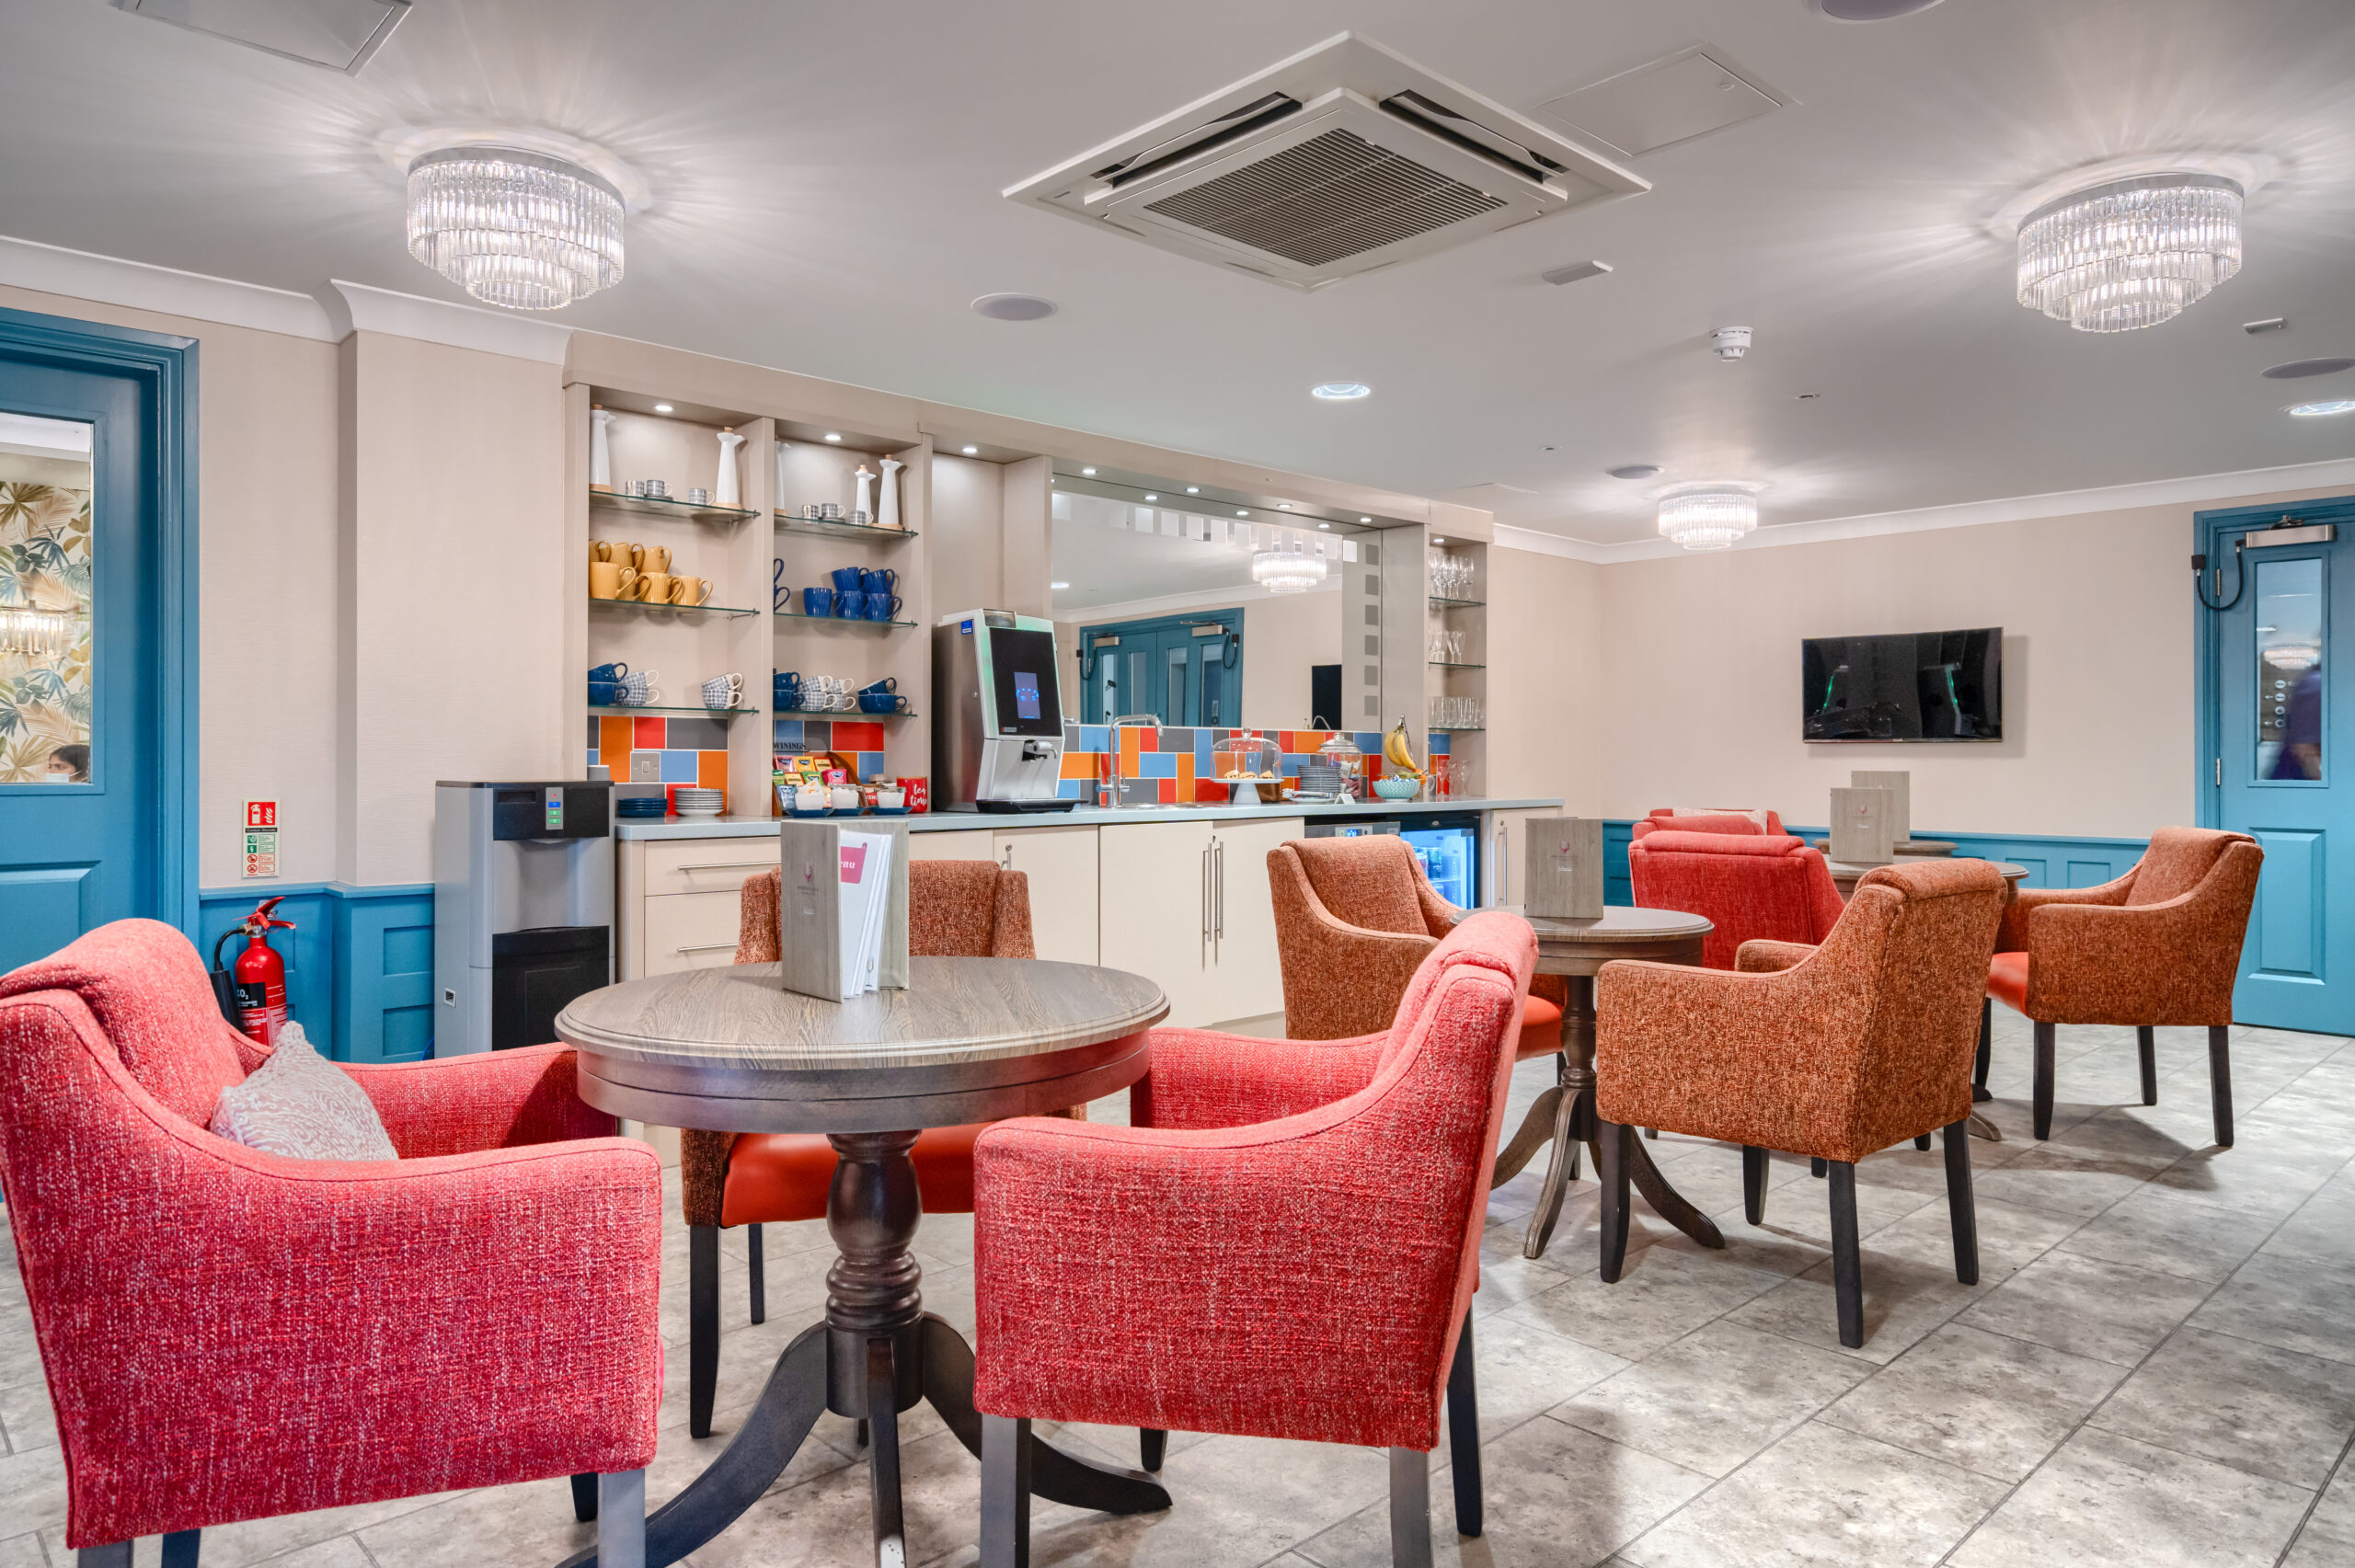 Beechwood Grove Care Home bistro area with tables and chairs